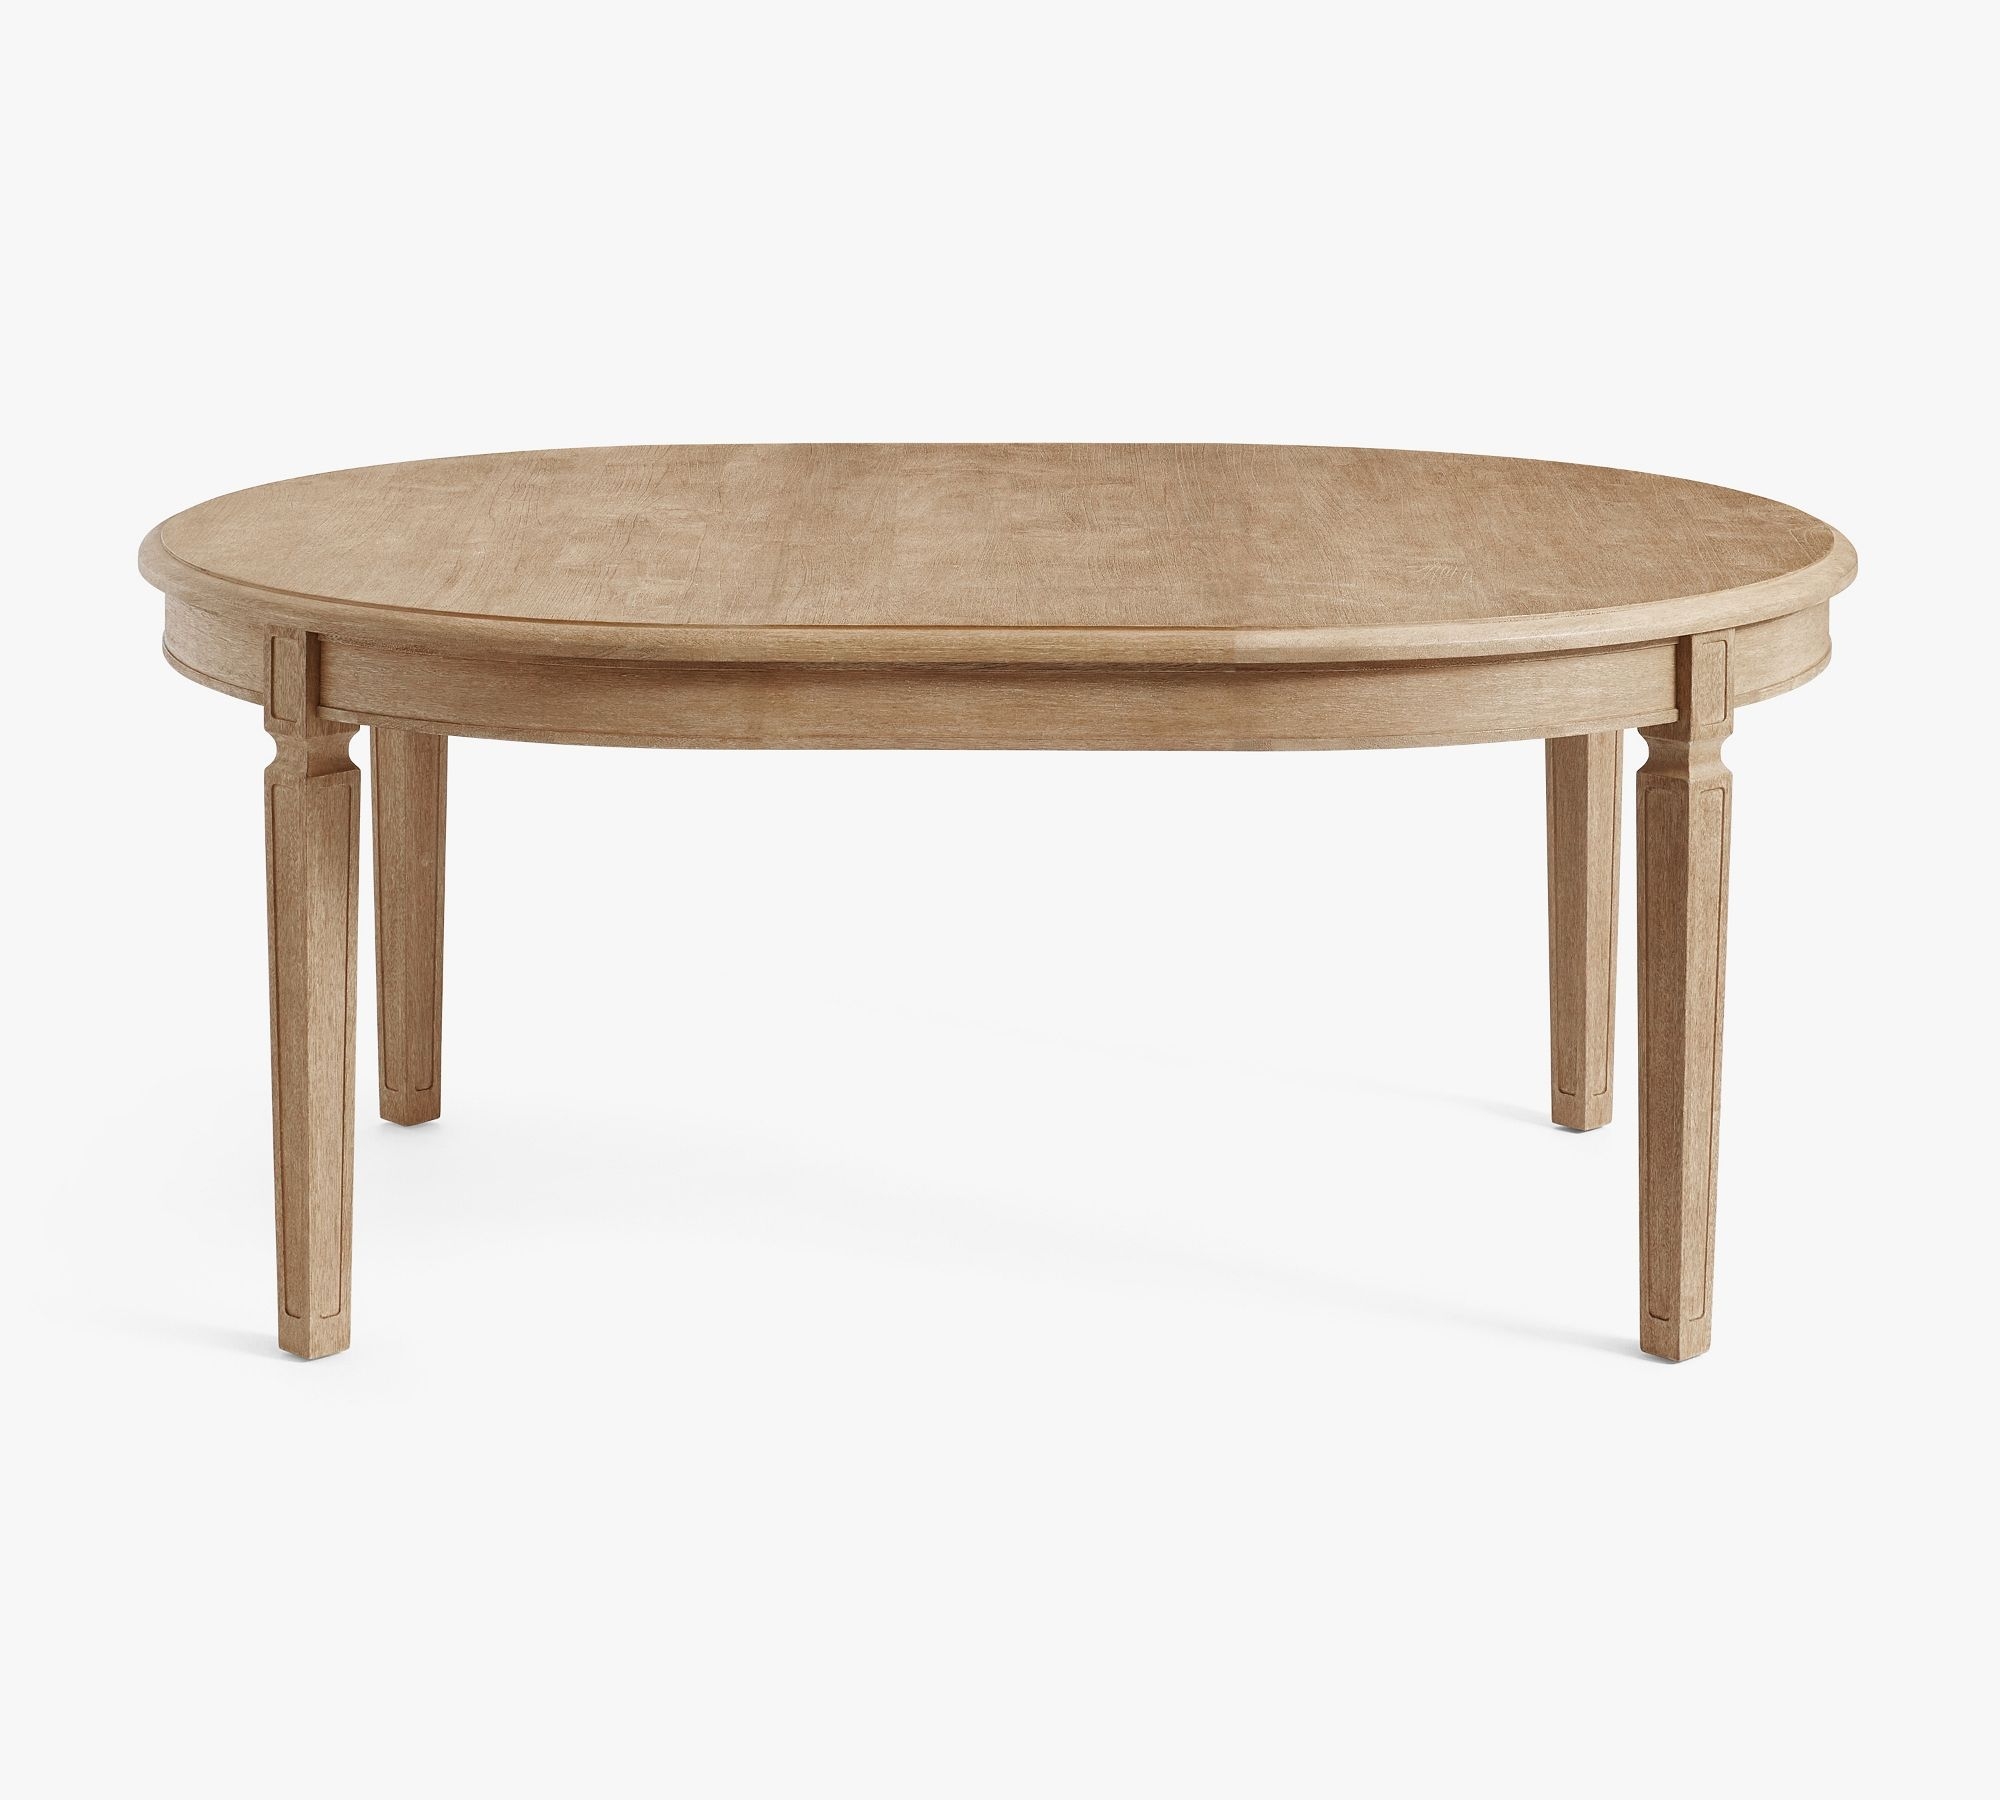 Sausalito Round Extending Dining Table, Seadrift, 54-72"L - Image 1